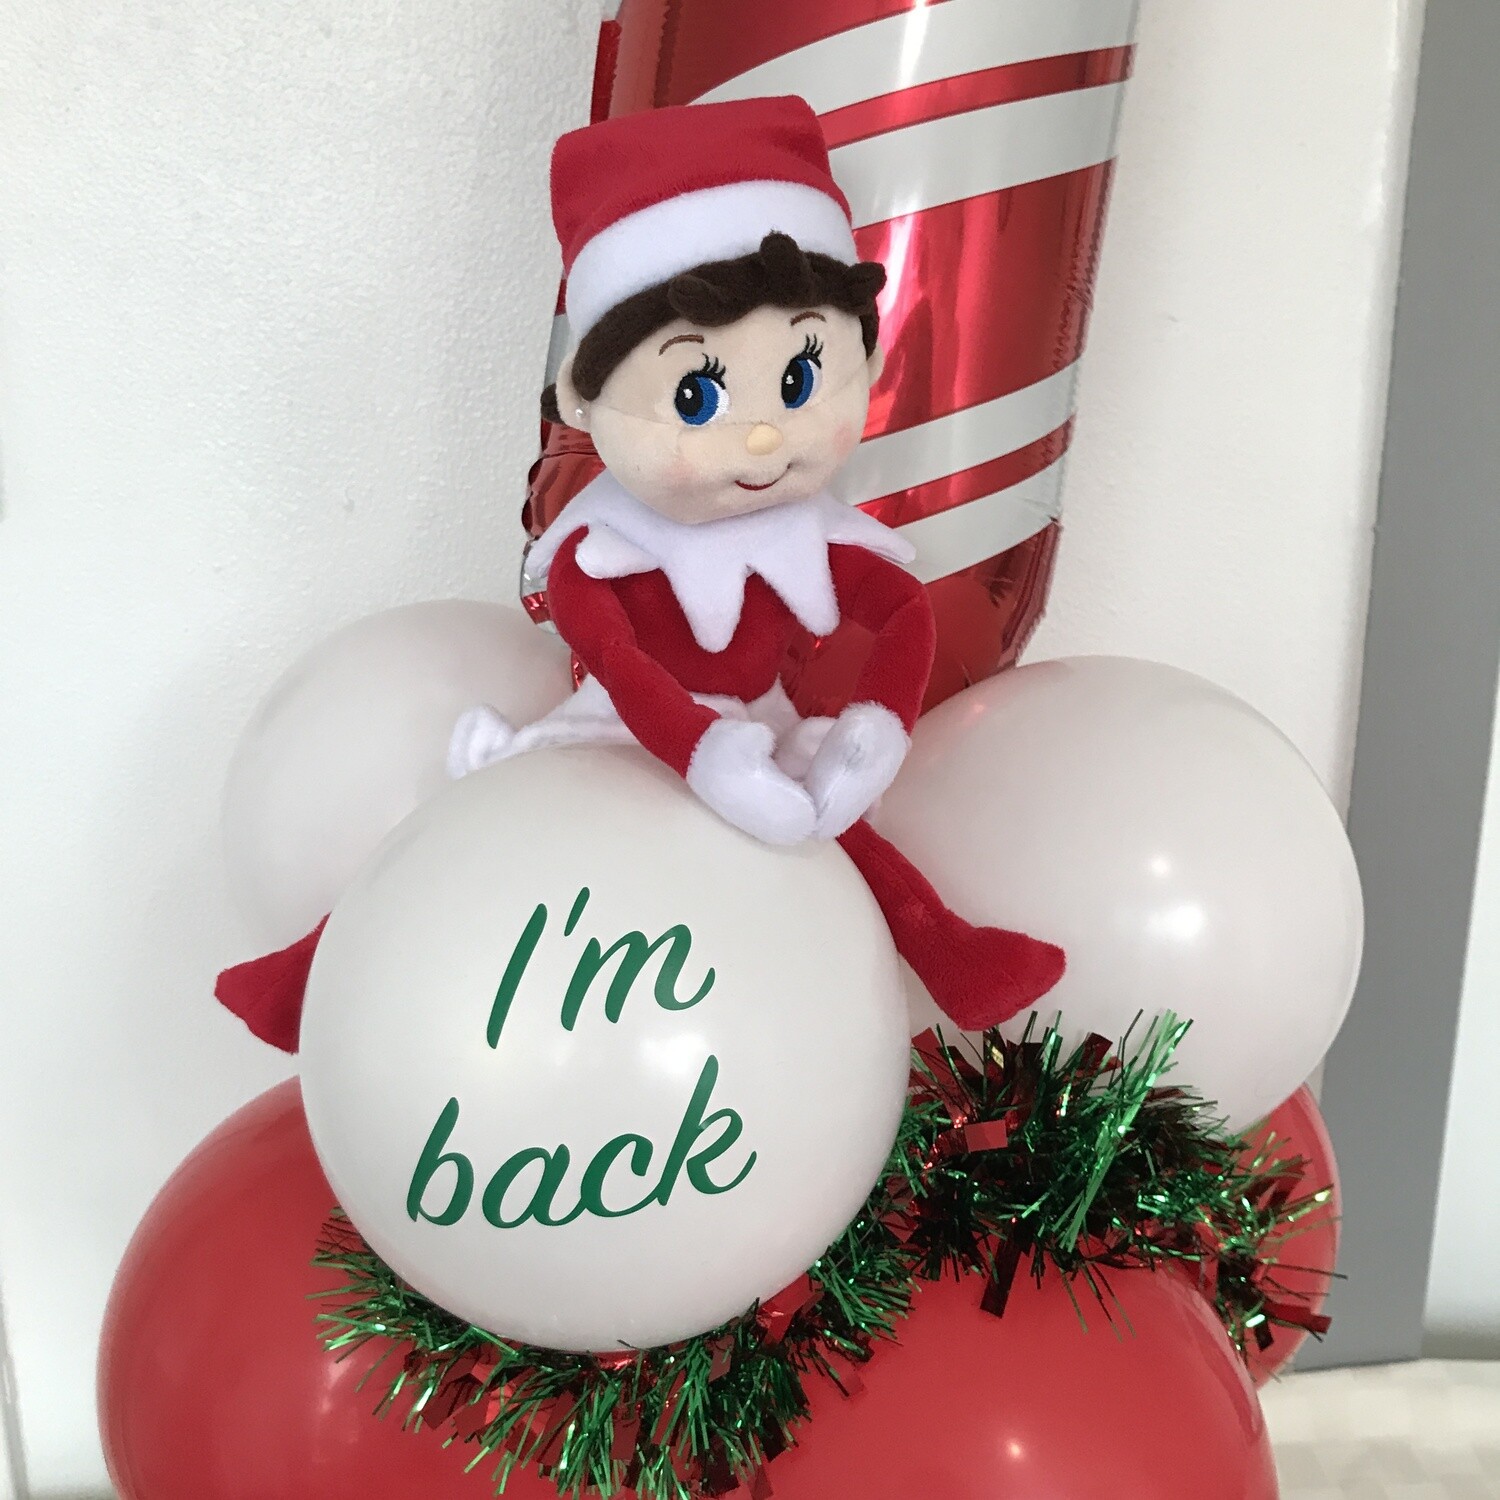 Santa's helper (We provide the doll) candy cane balloon decoration